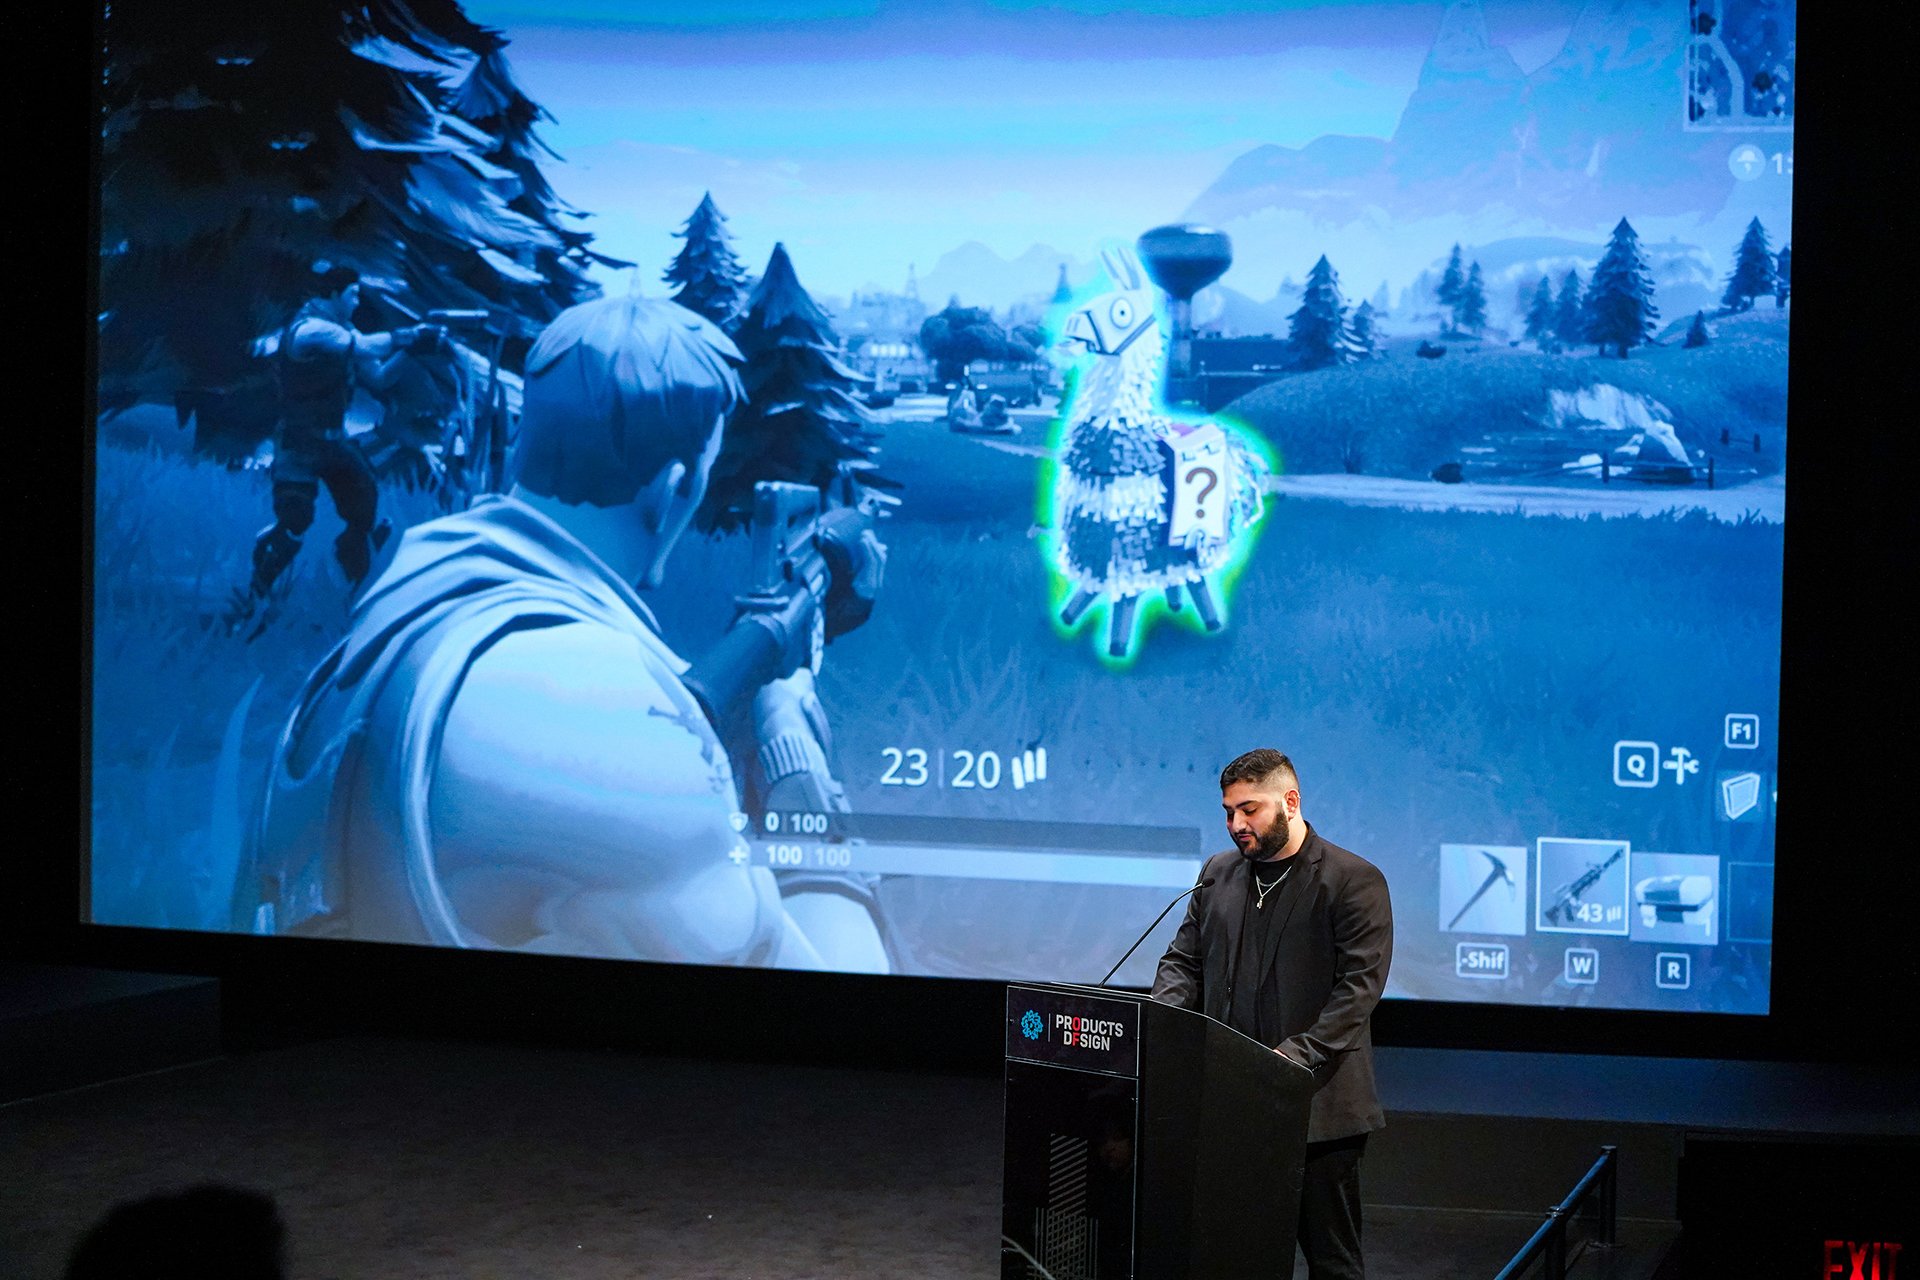  Speaker on the stage with projection of video game behind him 